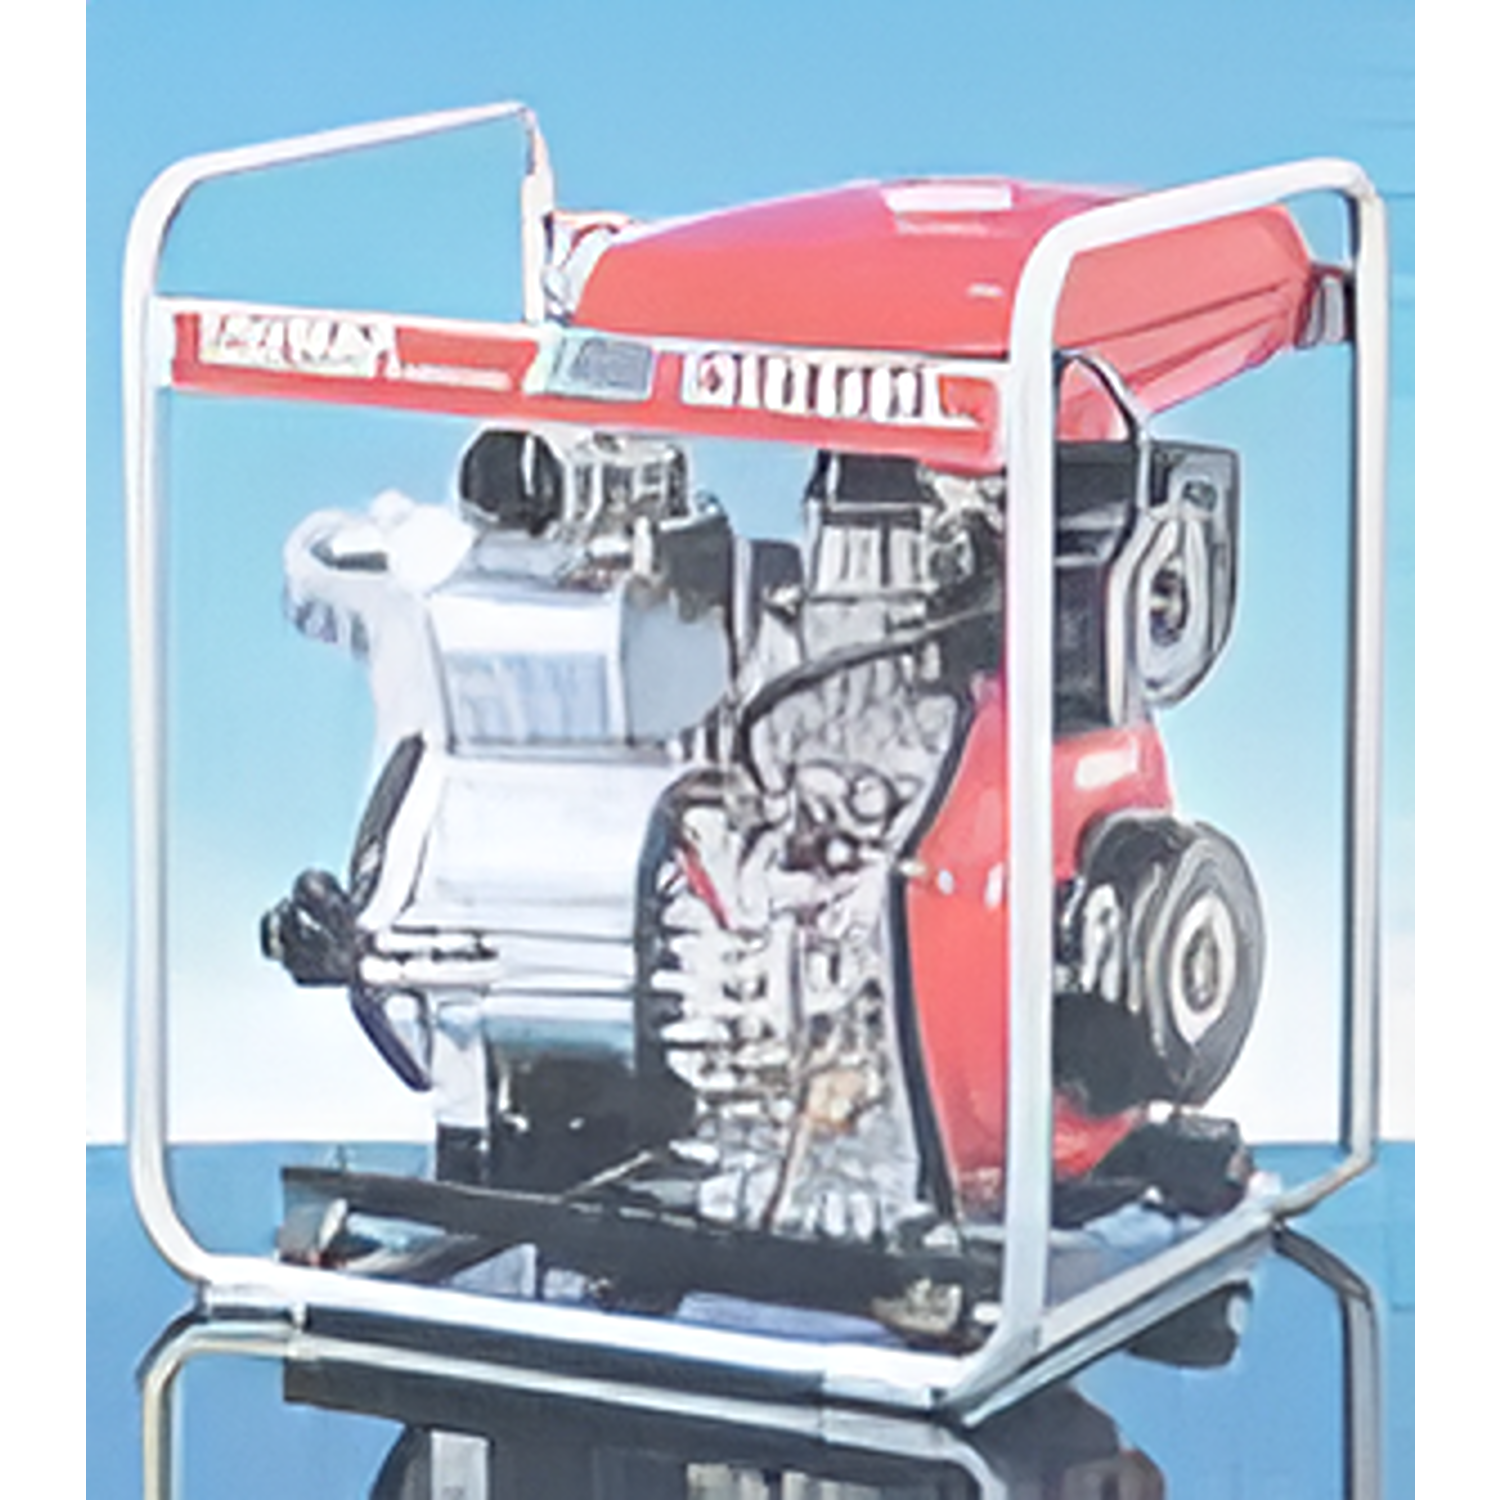 Yew Aik AA00160/AA00161 Air Cooled Diesel Pump Trash Pump - Premium Air Cooled Diesel Pump from YEW AIK - Shop now at Yew Aik.